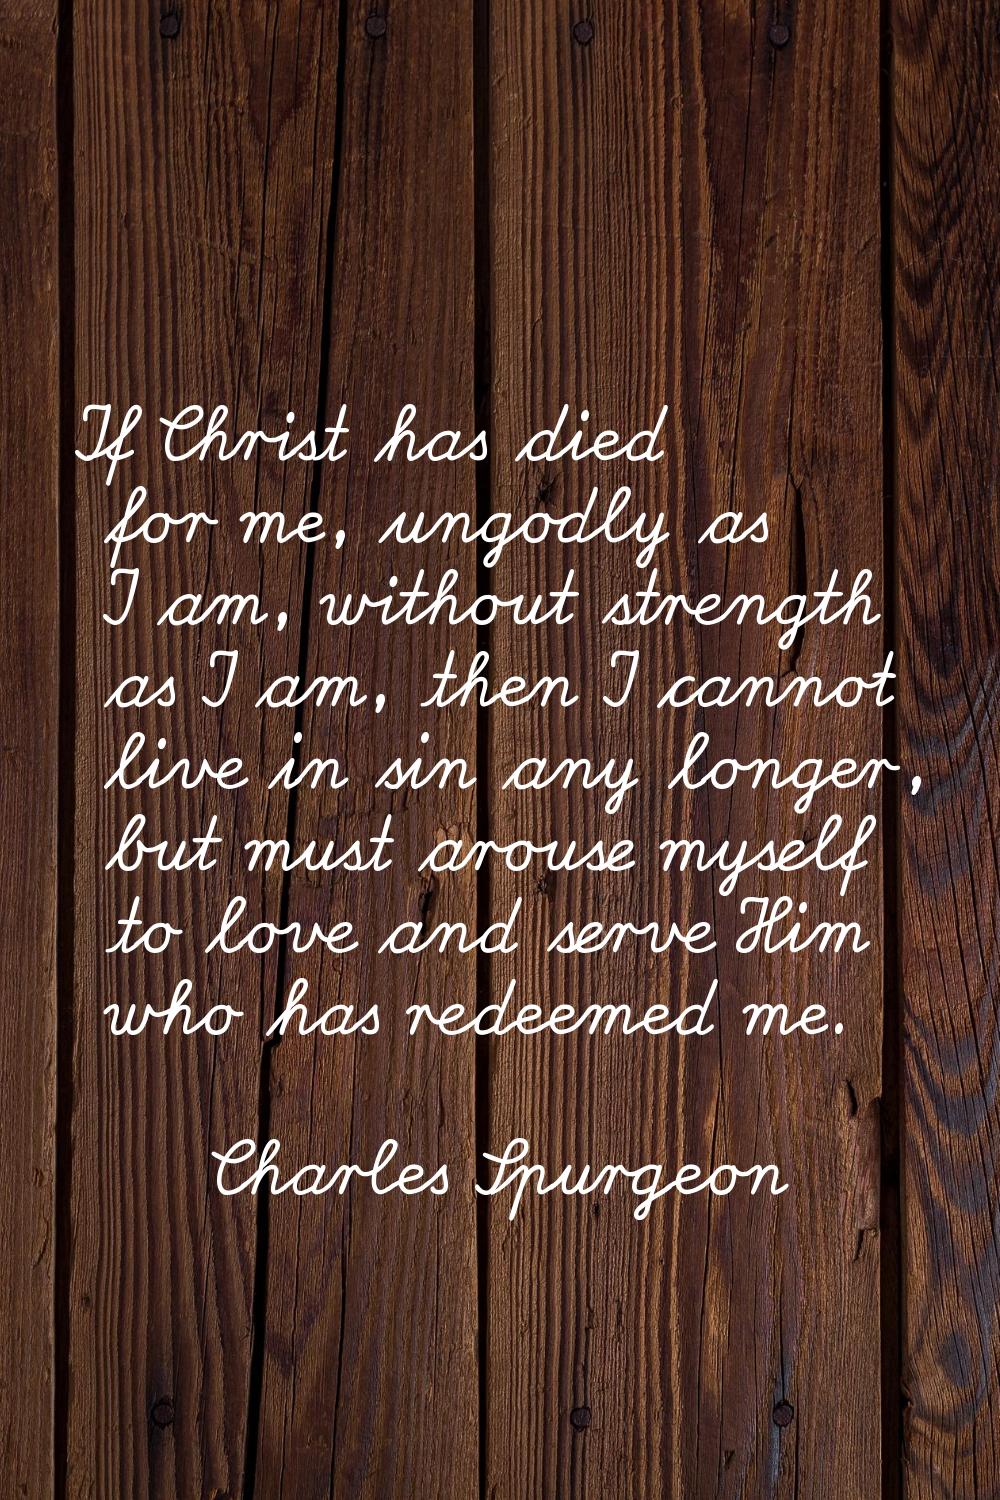 If Christ has died for me, ungodly as I am, without strength as I am, then I cannot live in sin any